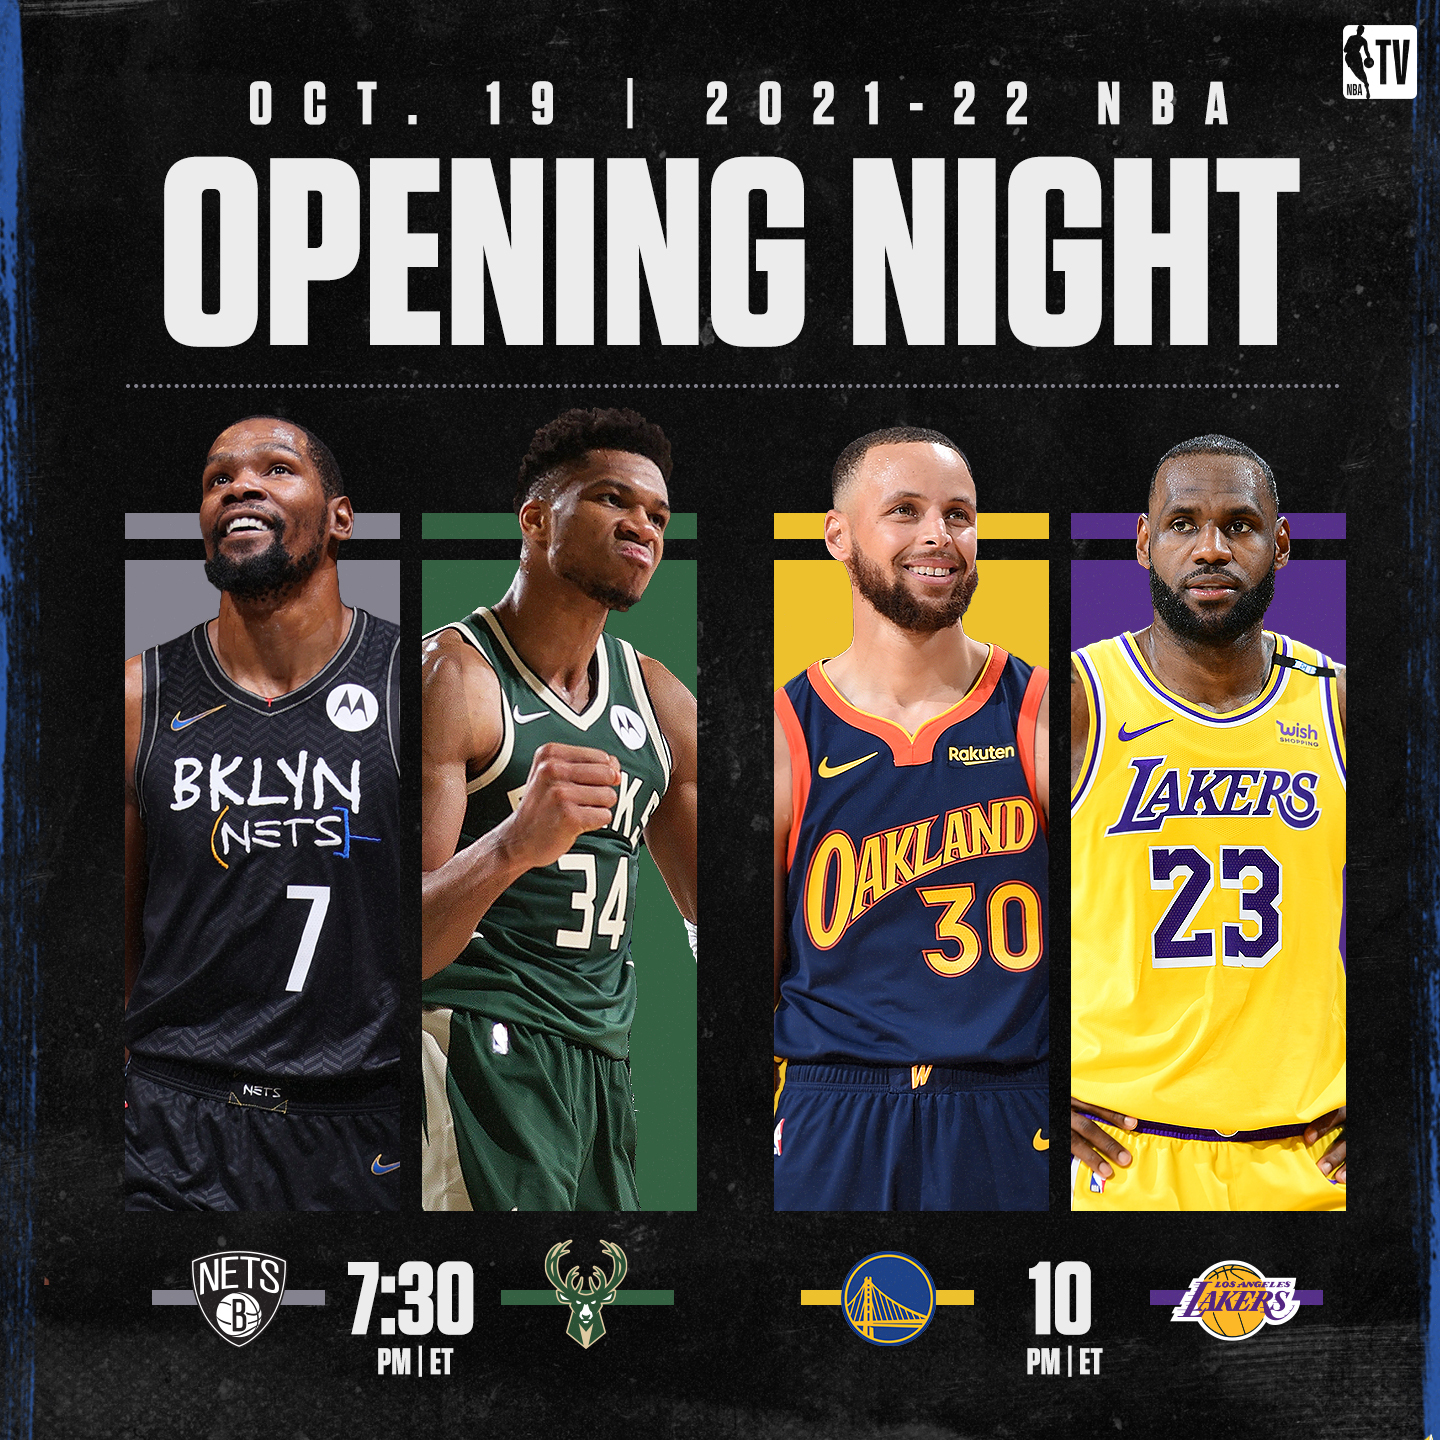 NBA TV on Twitter "The NBA opening night schedule is here